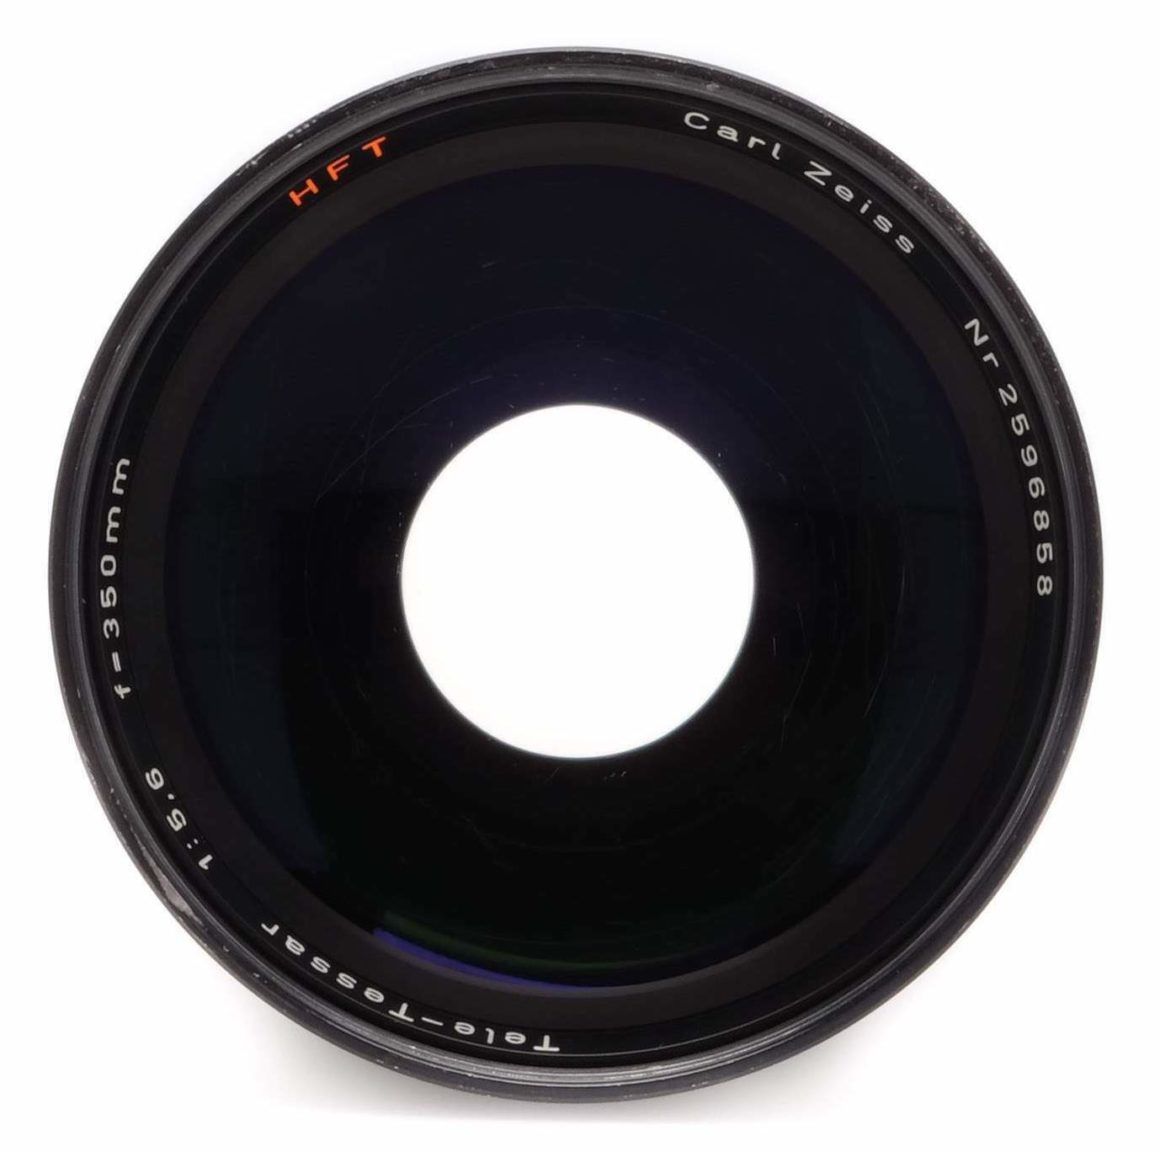 SEAL限定商品 Rollei 350mm Tele-Tessar Zeiss Carl レンズ(単焦点)